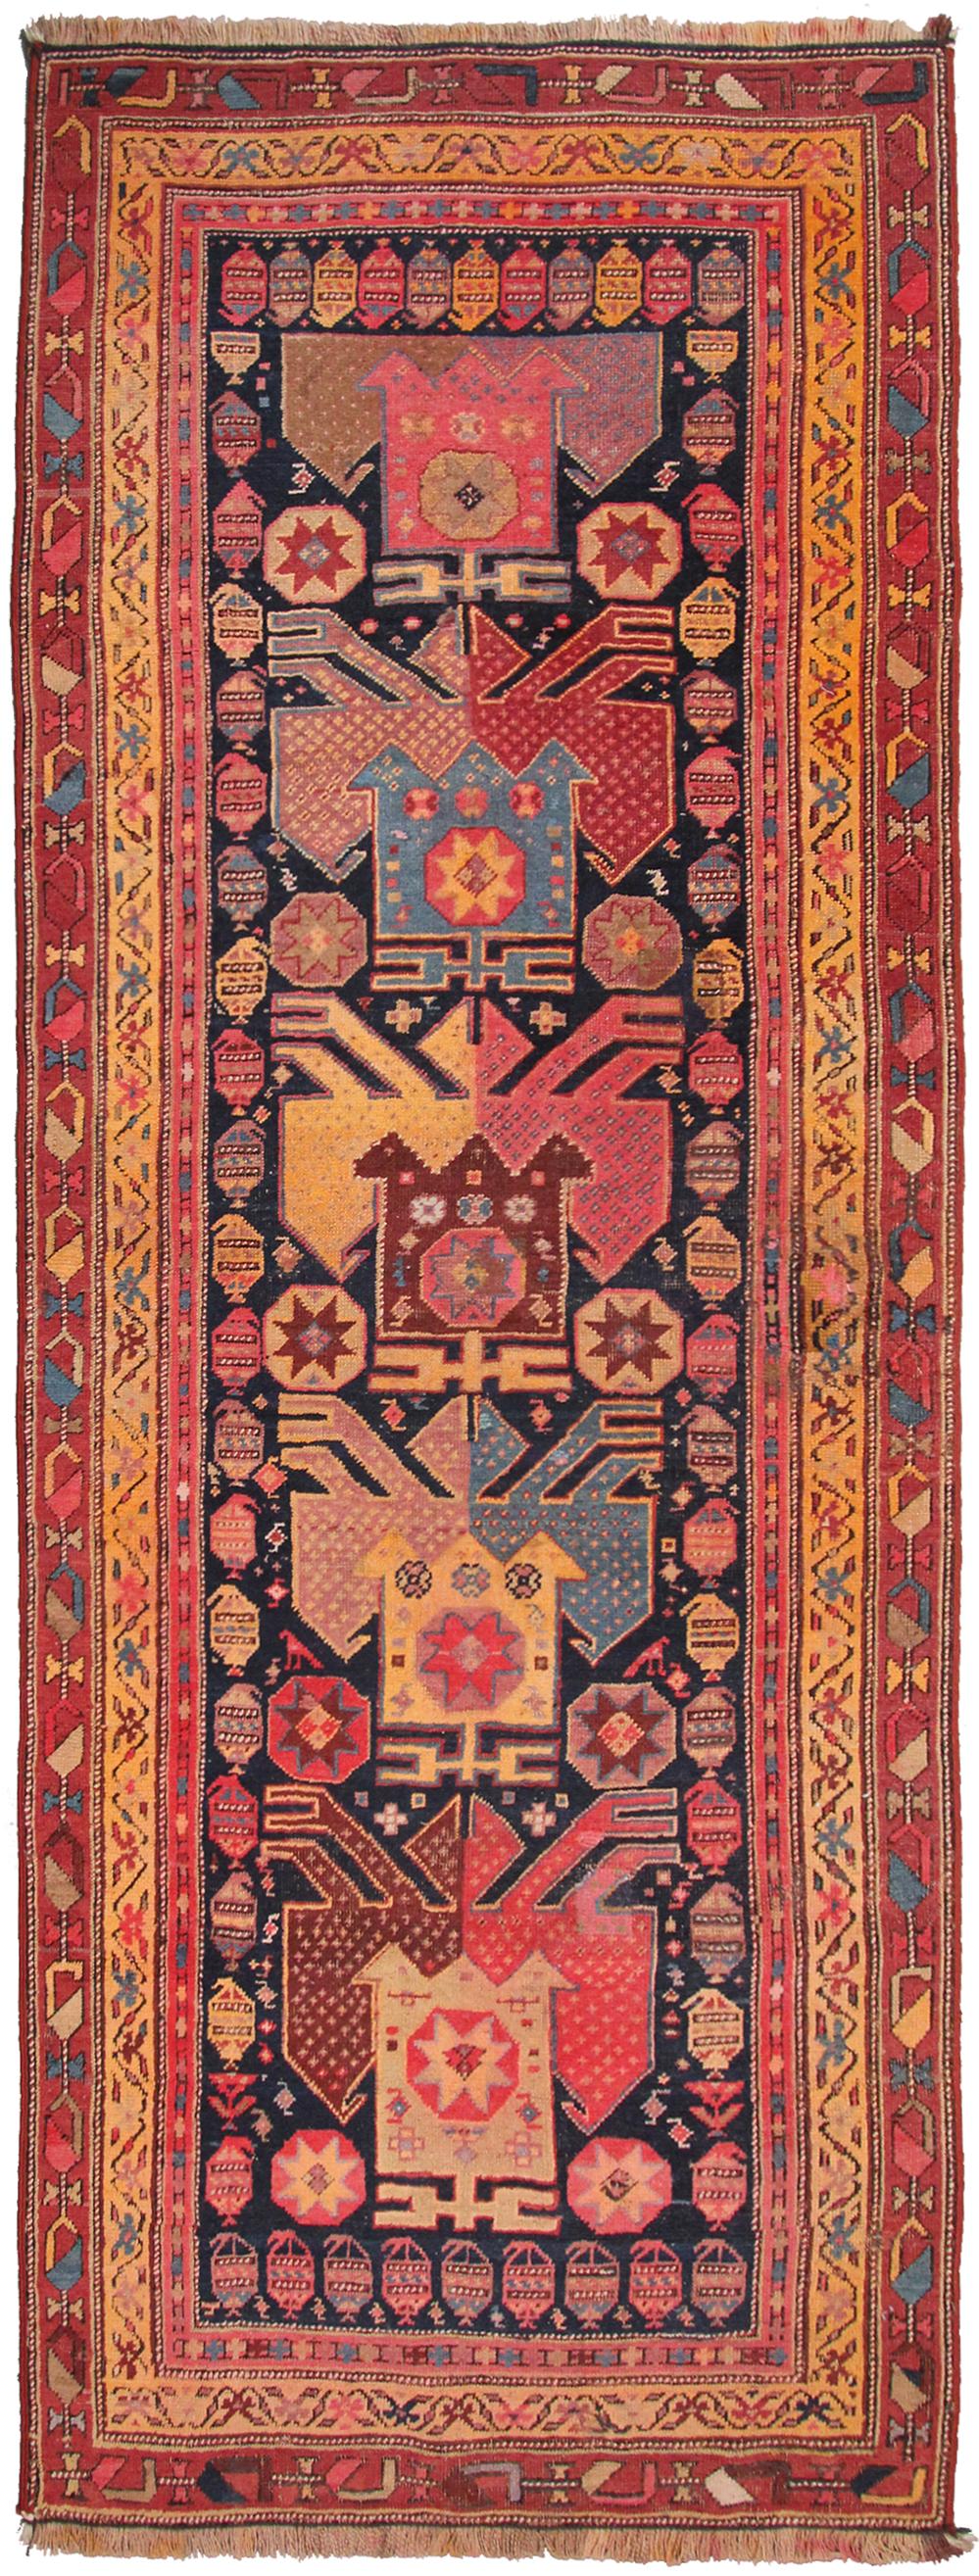 Hand-Knotted Antique Persian Bijar Rug Antique Persian Runner Geometric Wool Foundation For Sale